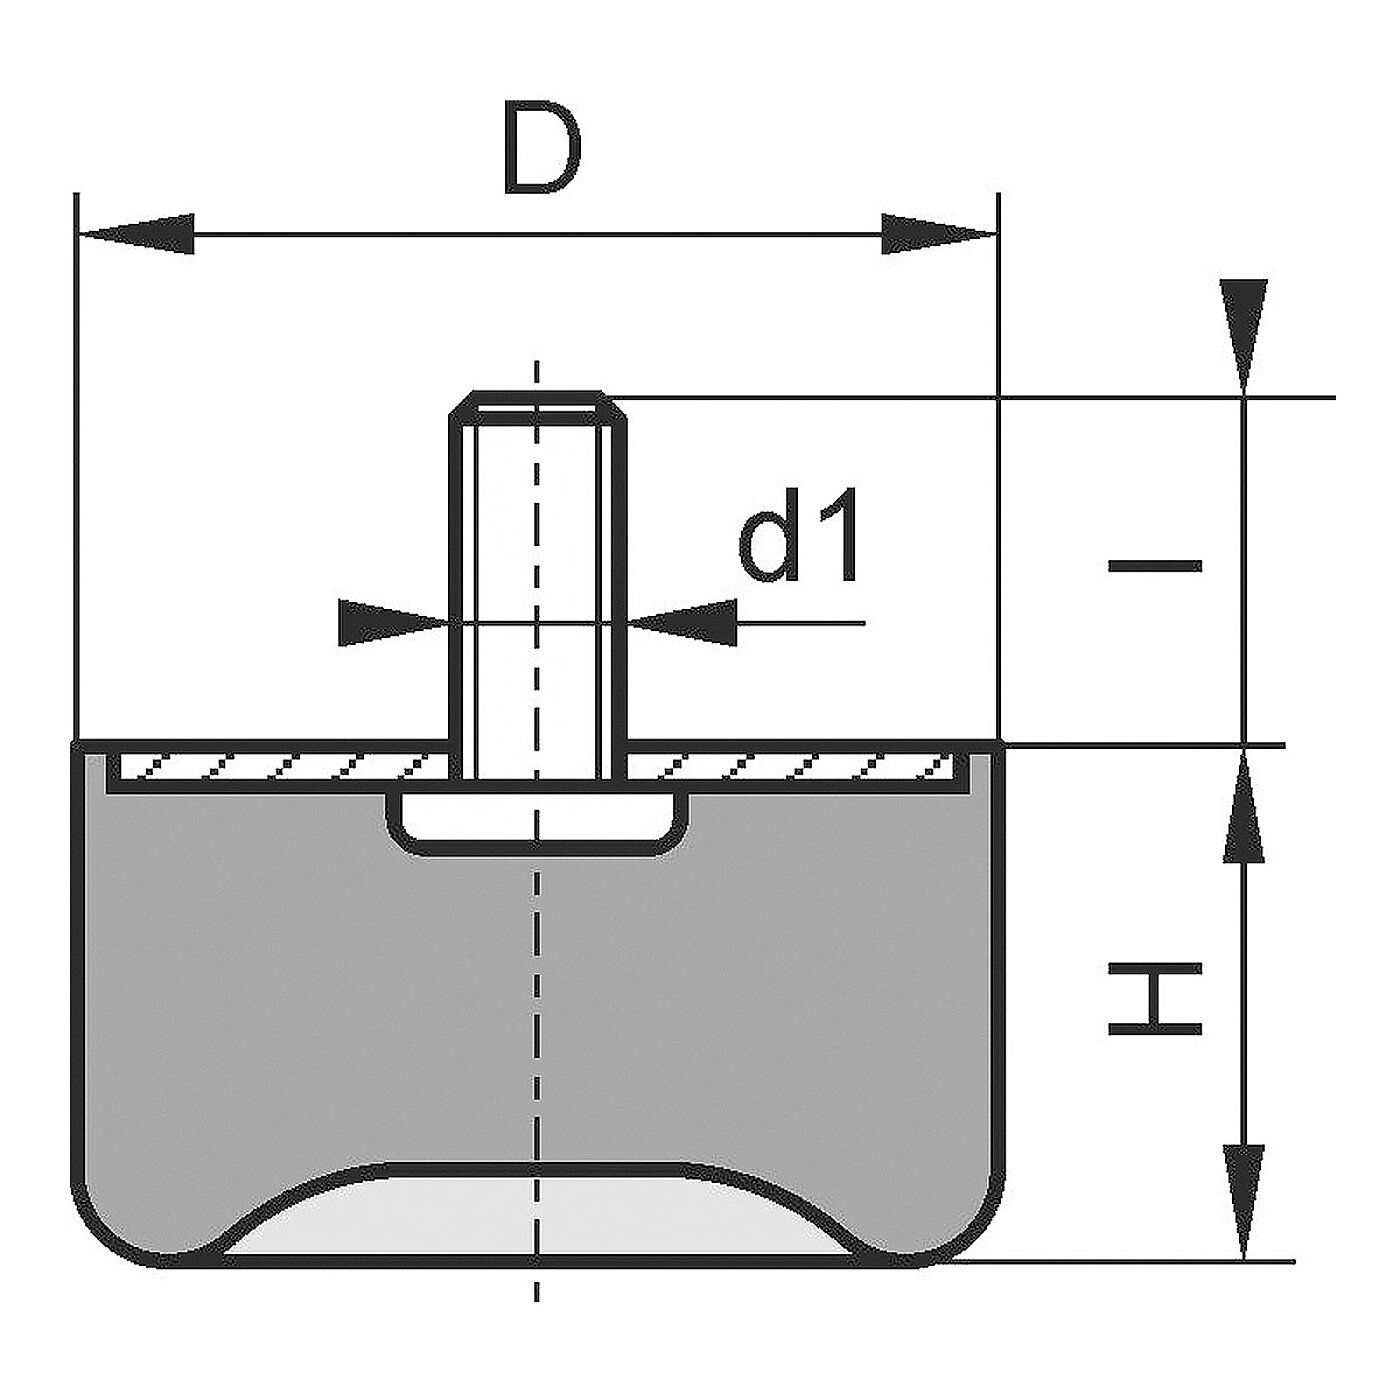 schematic drawing of a rubber-metal bearing with outer thread on one side and a cylindrical elastomer corpus with suction base